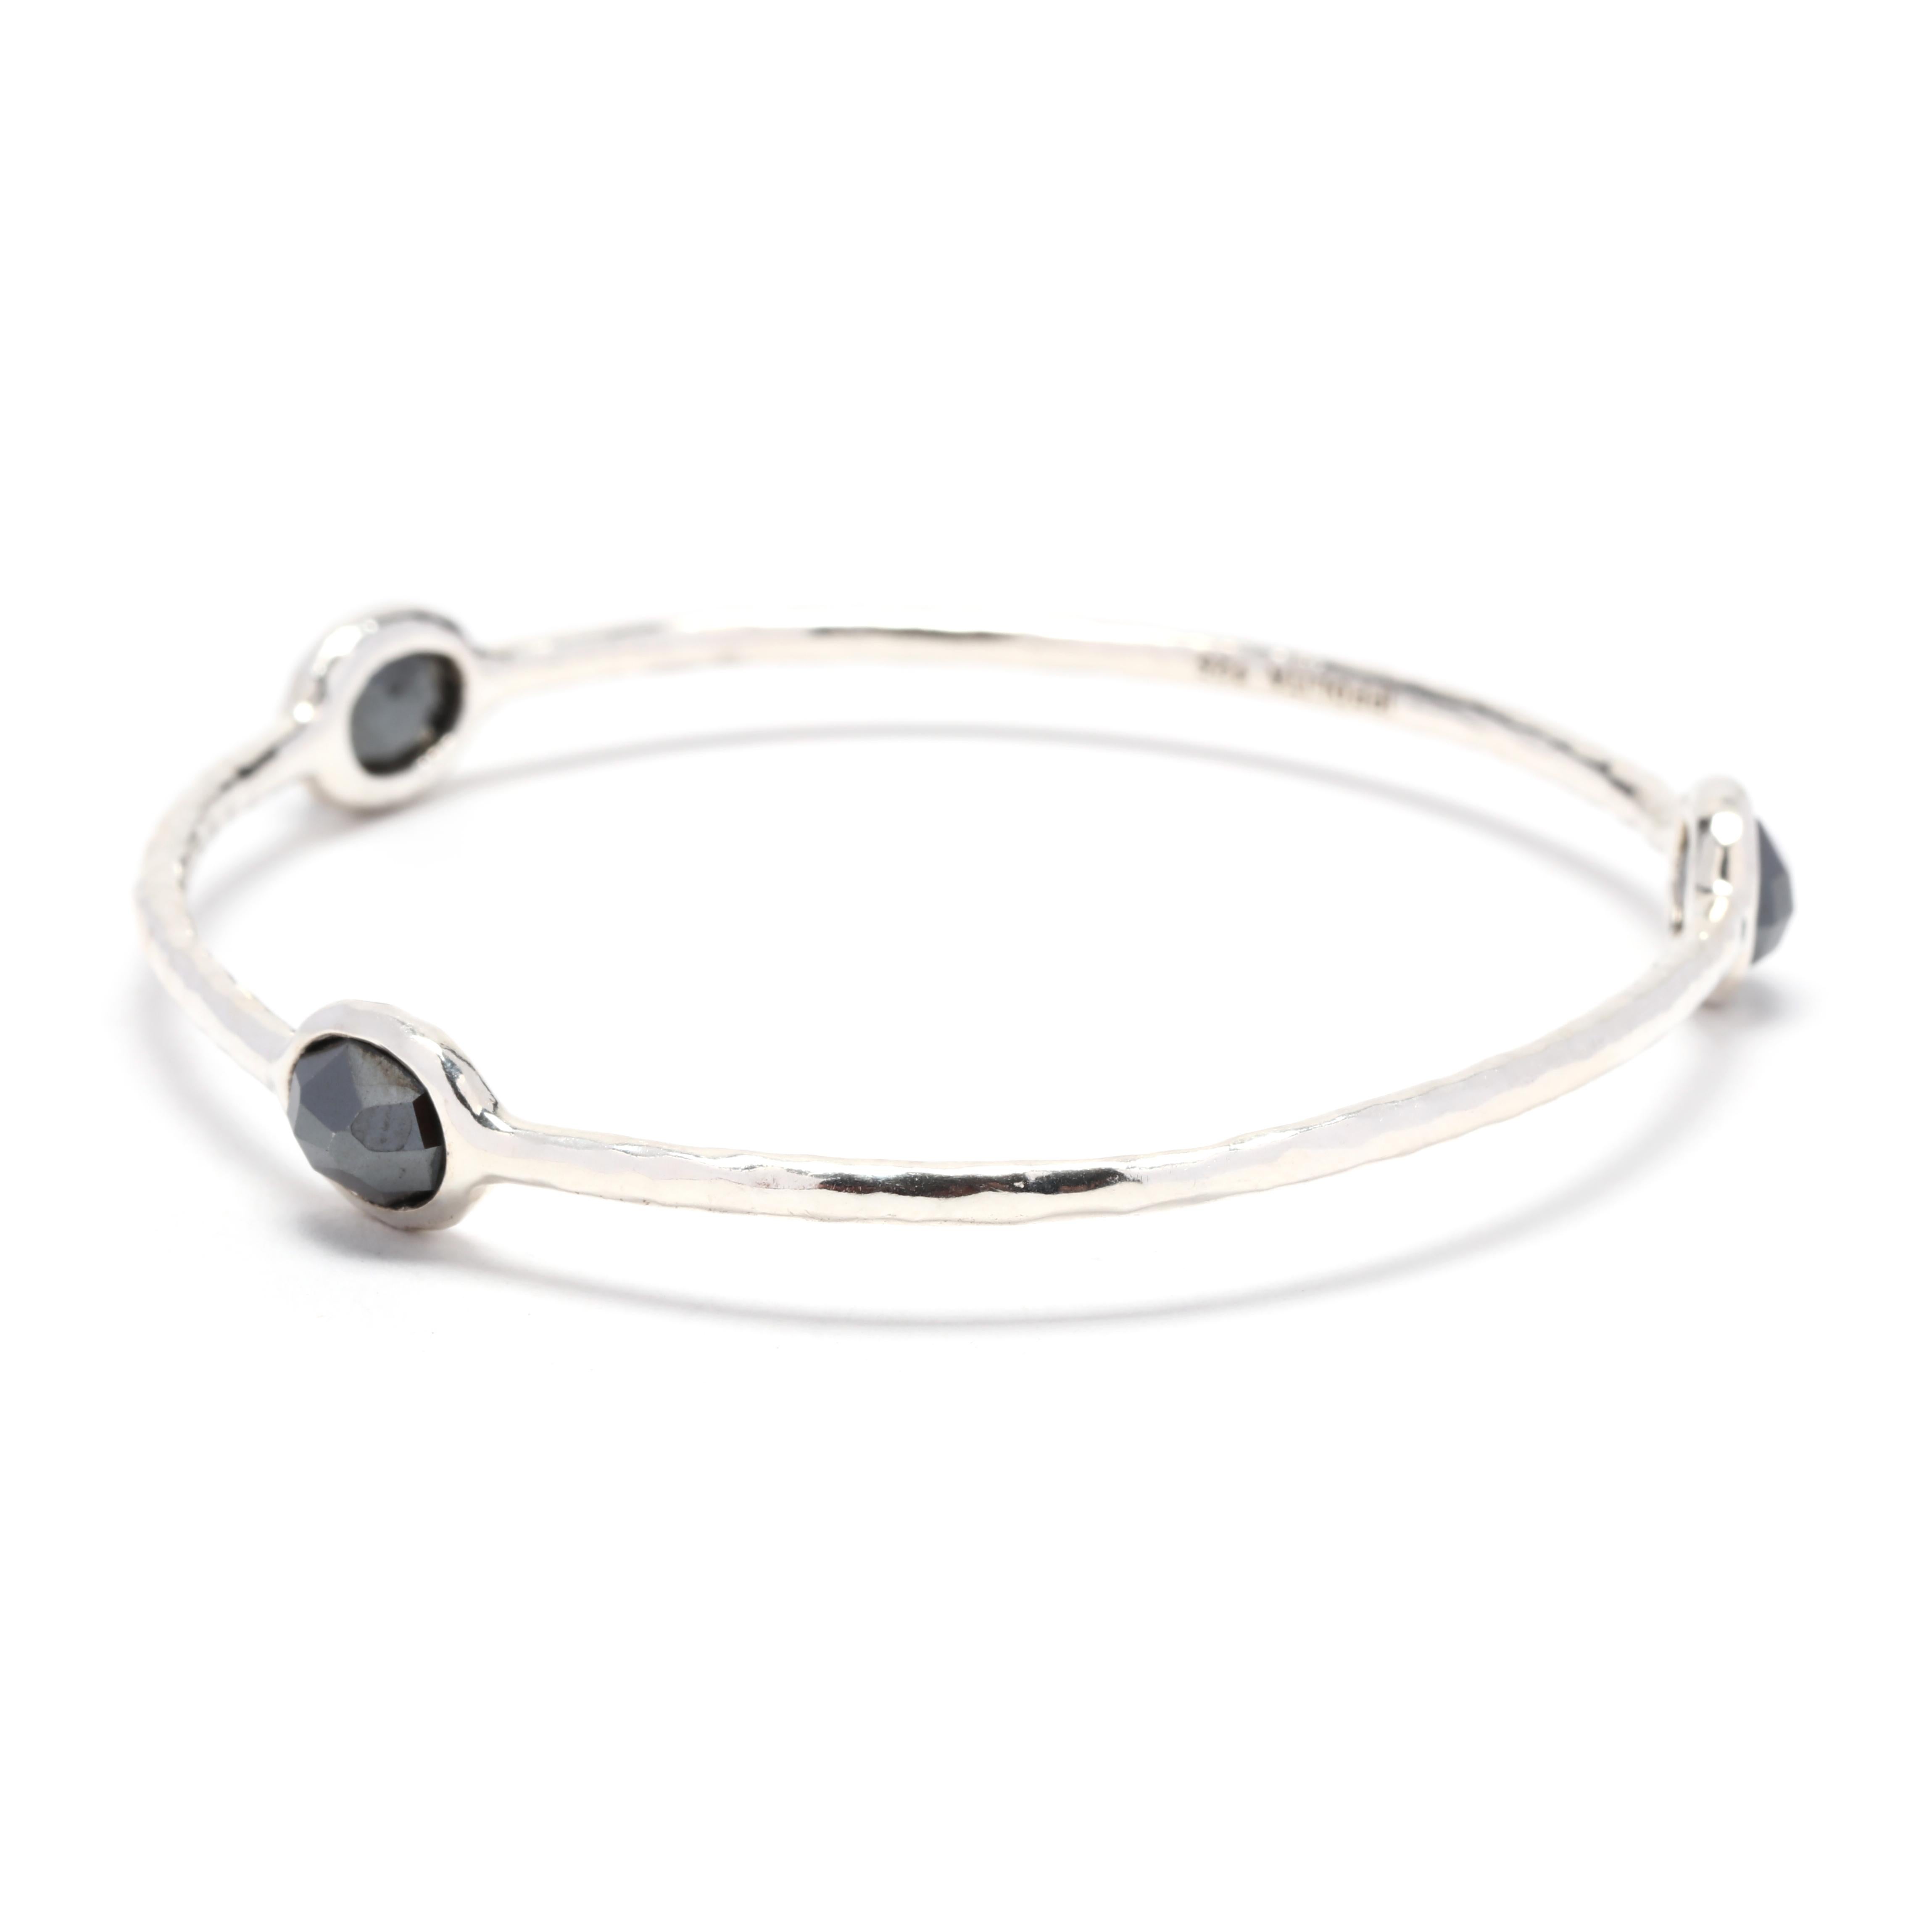 This Ippolita Rock Candy Hematite 3 Stone Bangle is a beautiful and unique piece of jewelry. Made from high-quality sterling silver, this bangle bracelet features three stunning hematite gemstones that add a touch of elegance to any